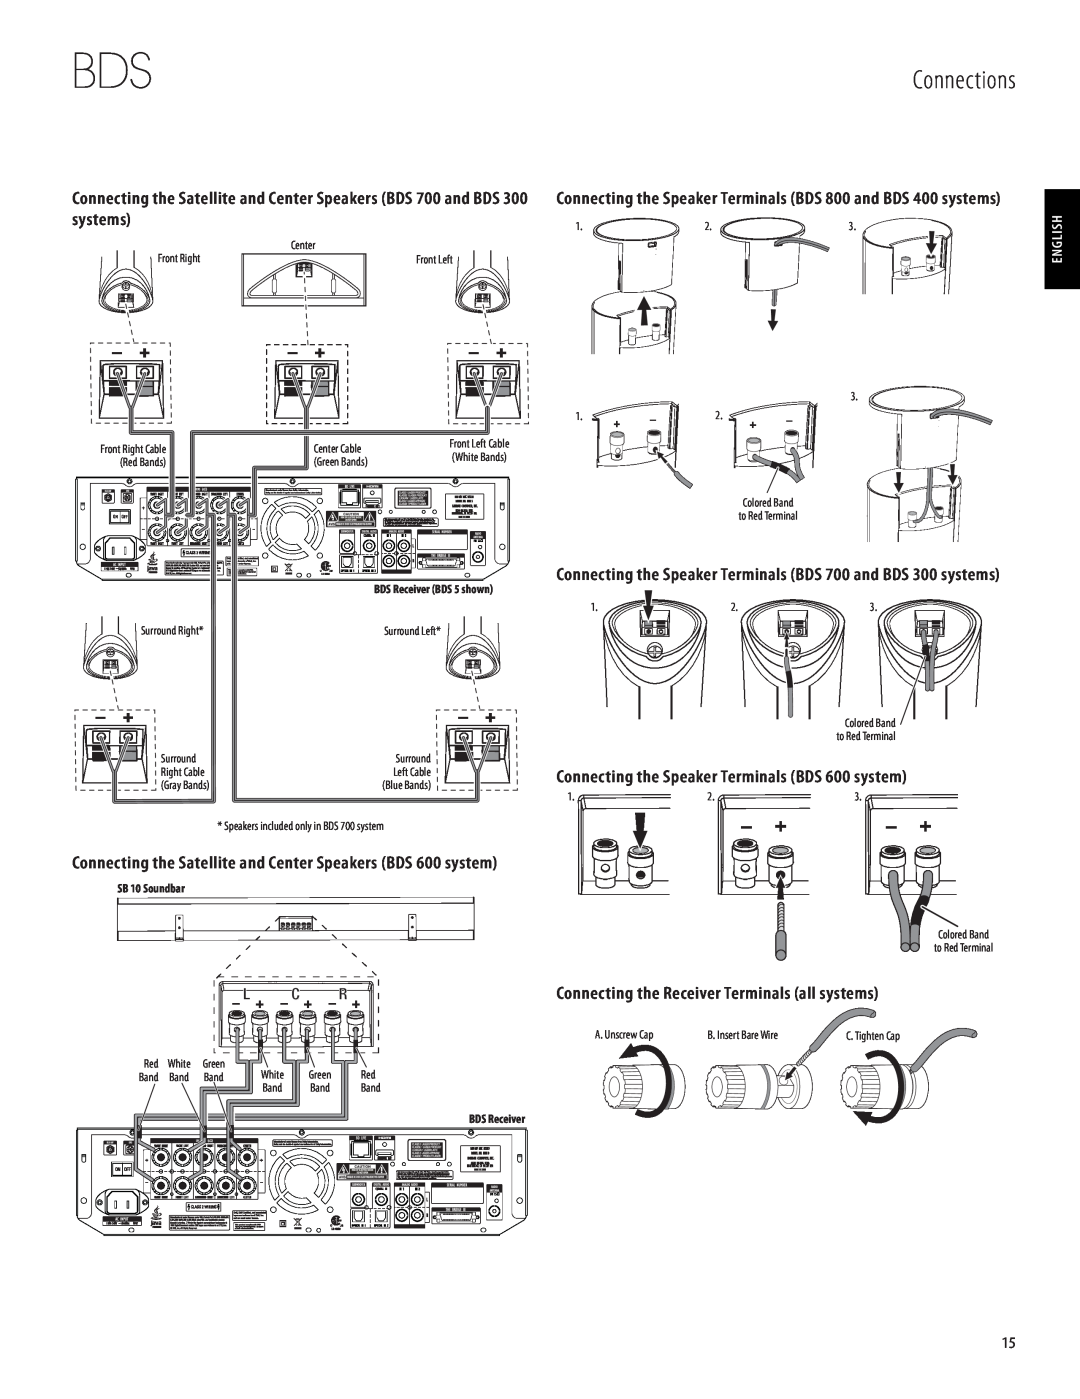 Harman-Kardon 950-0321-001 owner manual Connections, systems, Connecting the Speaker Terminals BDS 600 system, English 